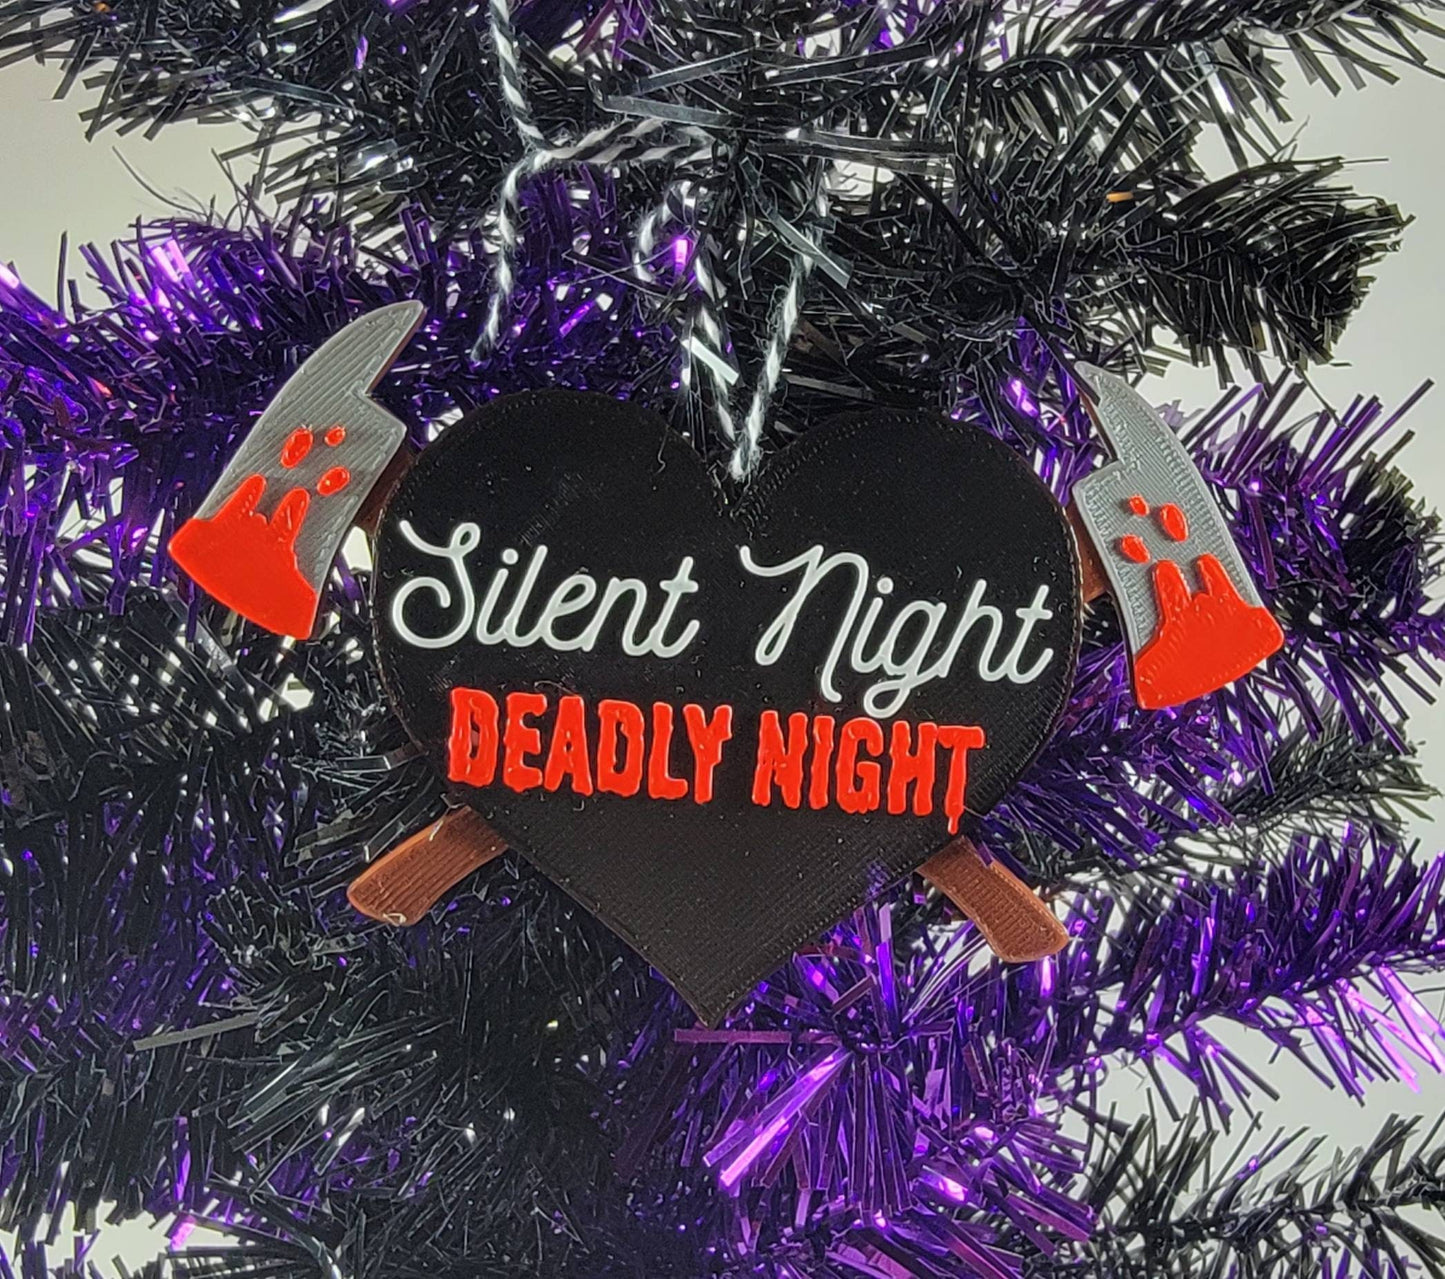 Silent Night Deadly Night 3D Printed Spooky Christmas Ornament